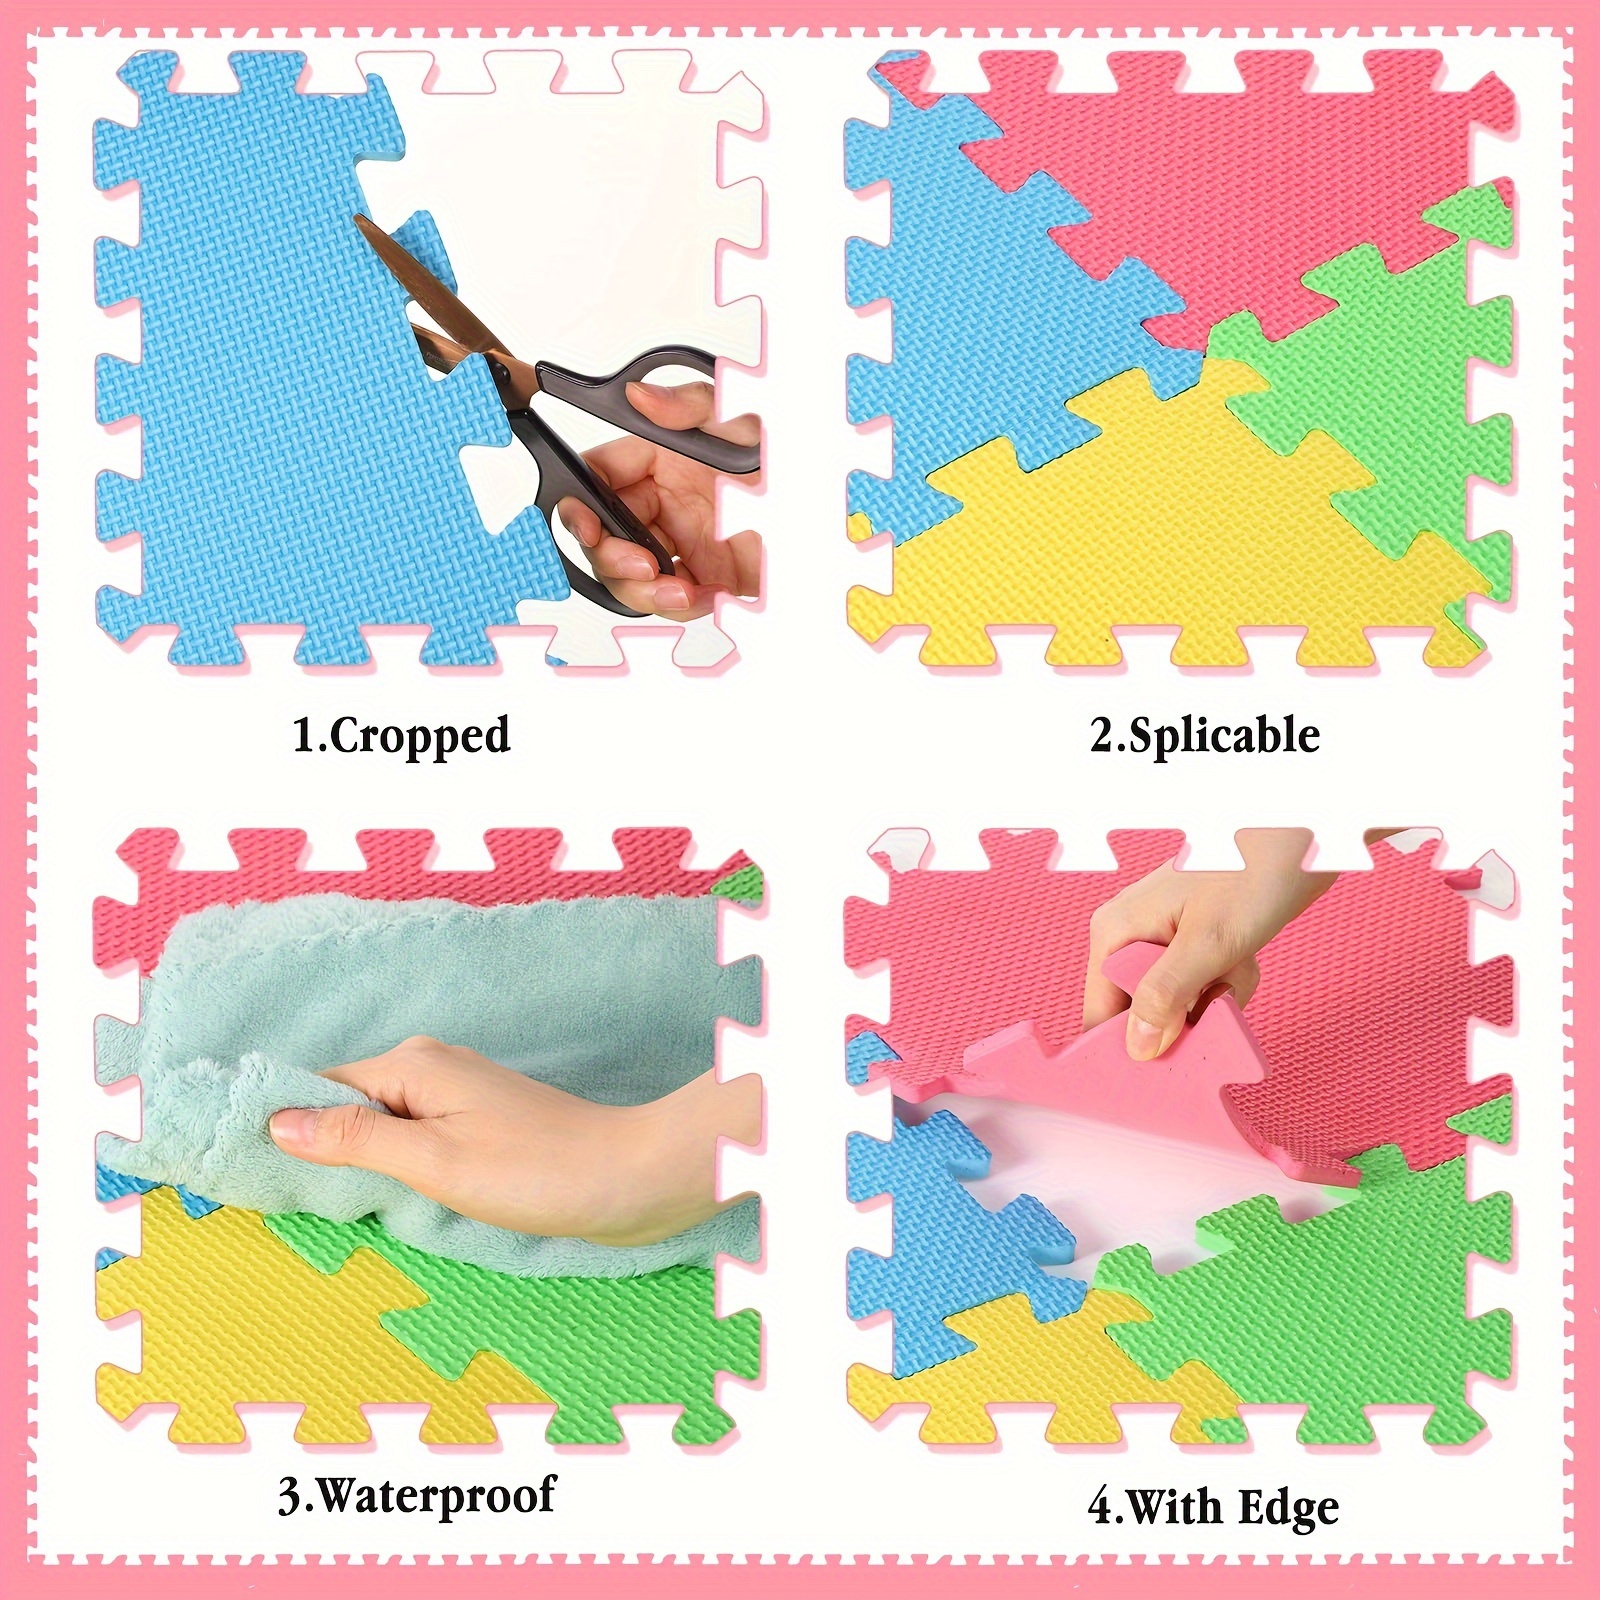 EVA Foam Safety: Is Formamide Toxic in Puzzle Play Mats